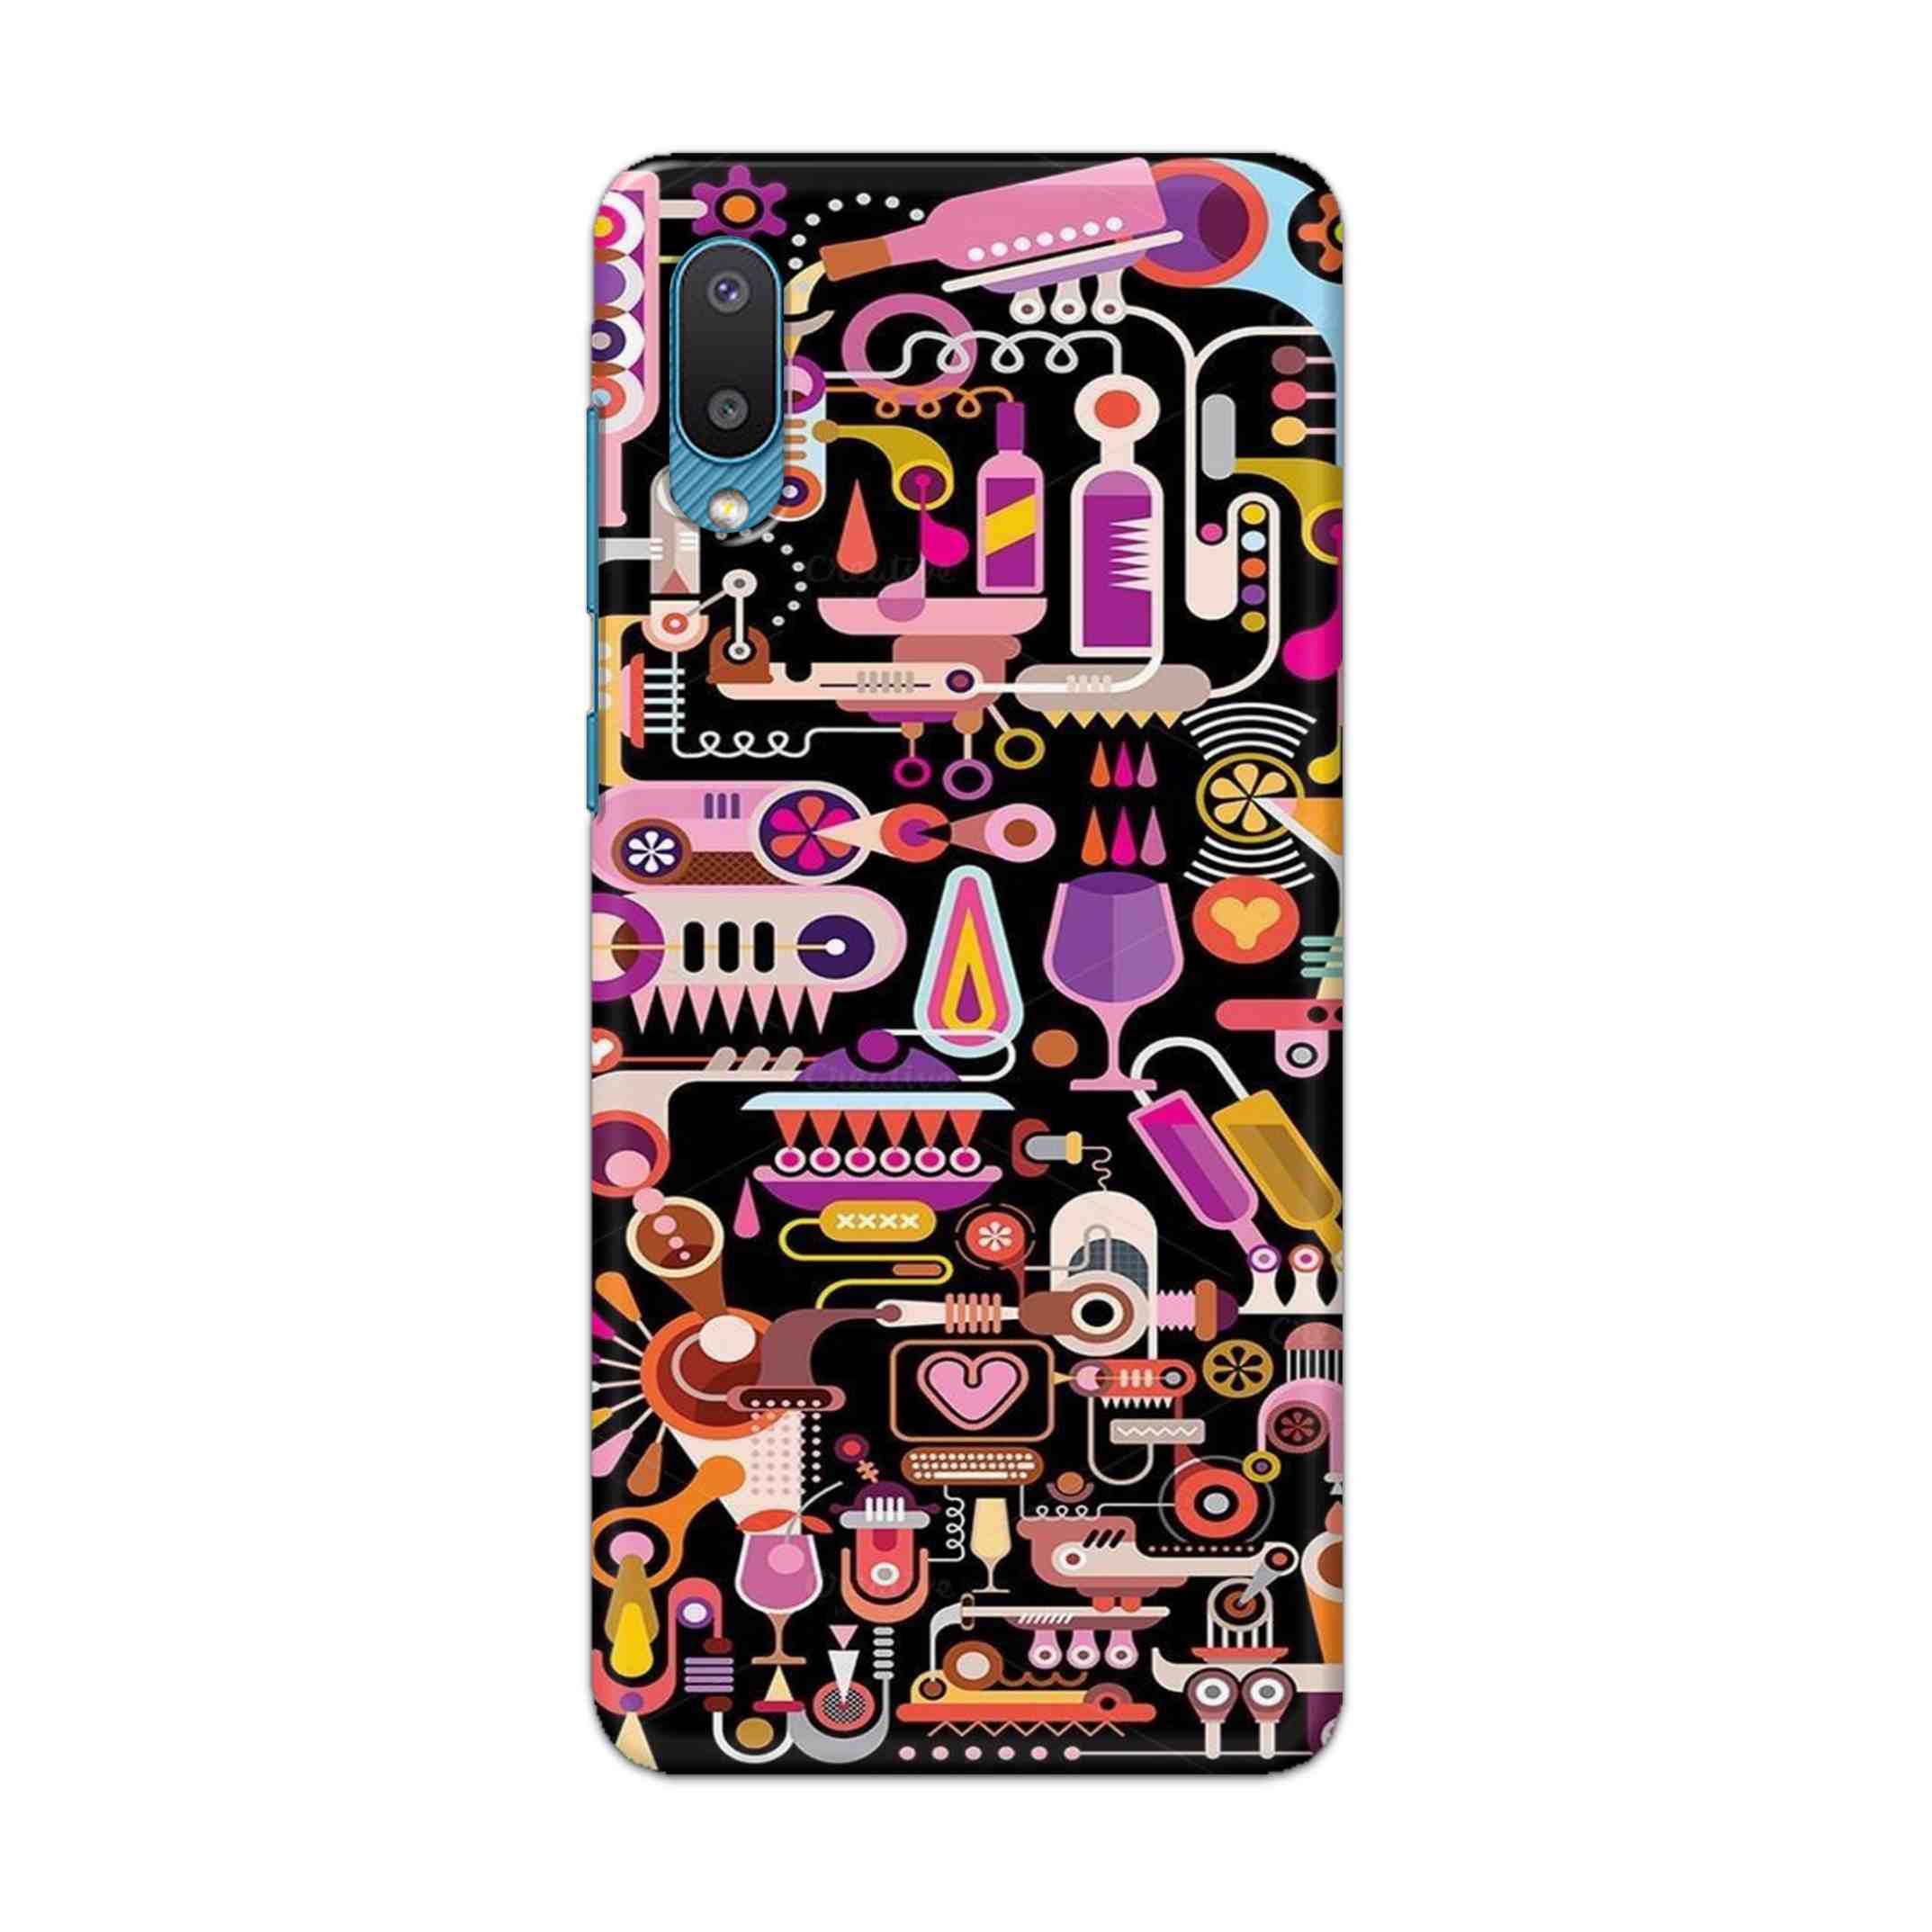 Buy Lab Art Hard Back Mobile Phone Case Cover For Samsung Galaxy M02 Online